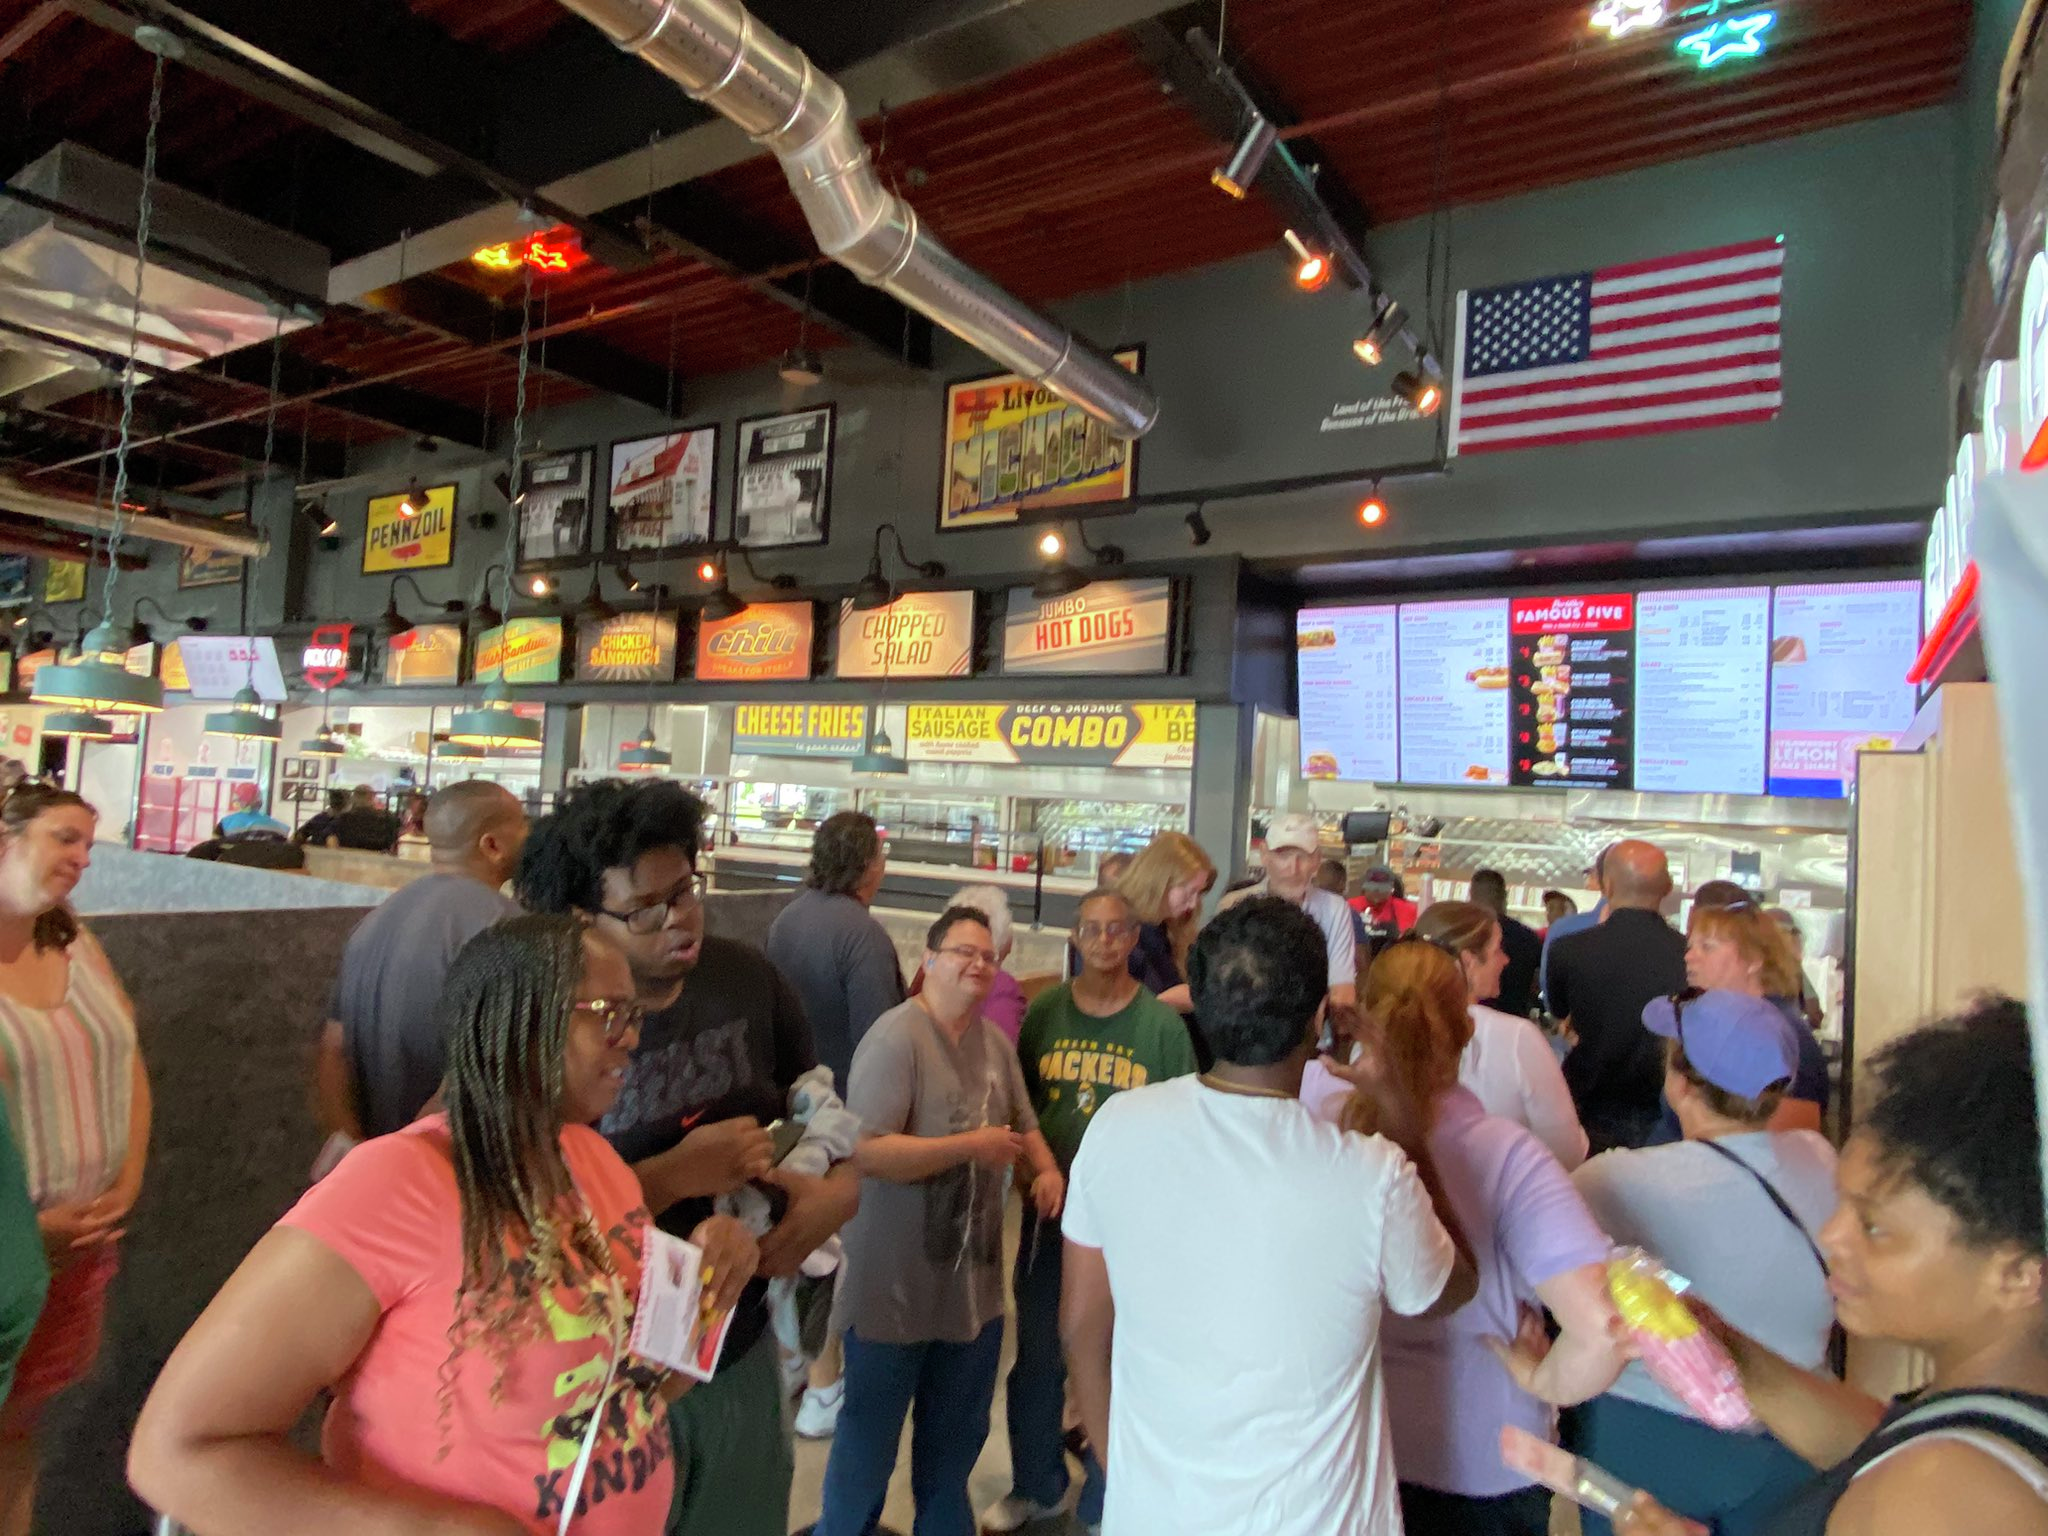 'Top quality' hot dog joint Portillo's opens new location in Livonia